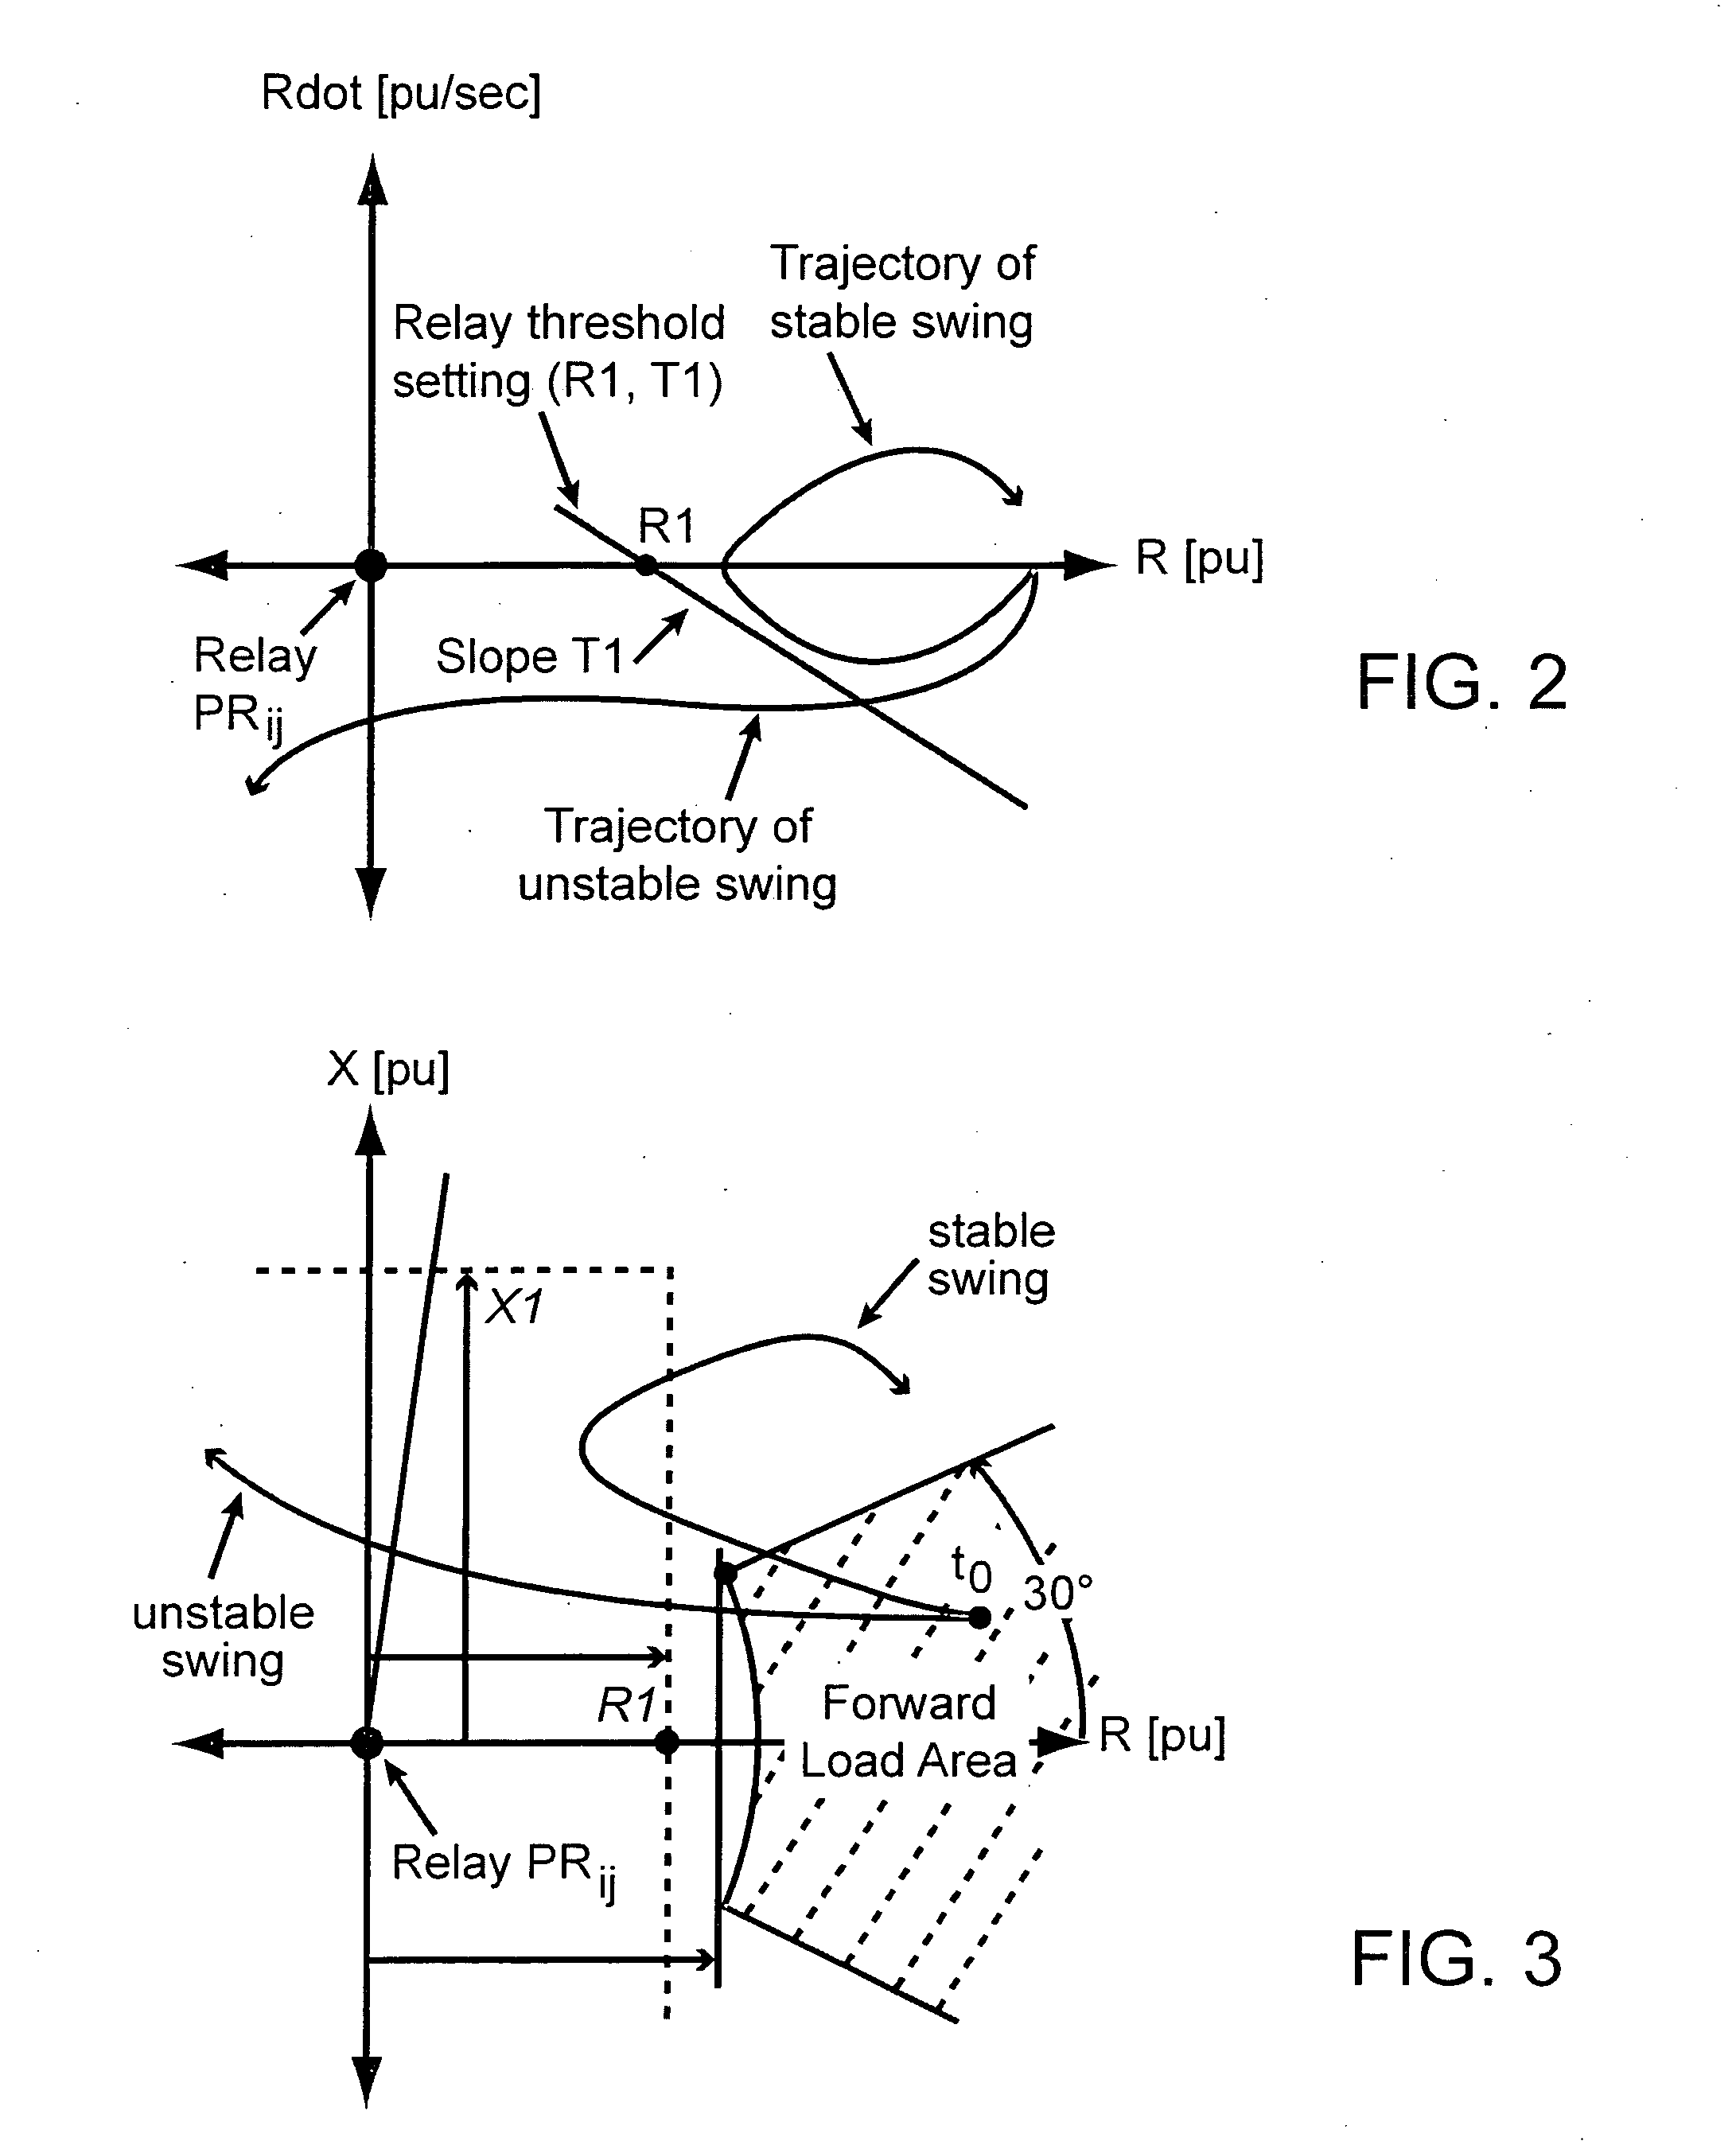 Methods and processes relating to electricity power generation and distribution networks